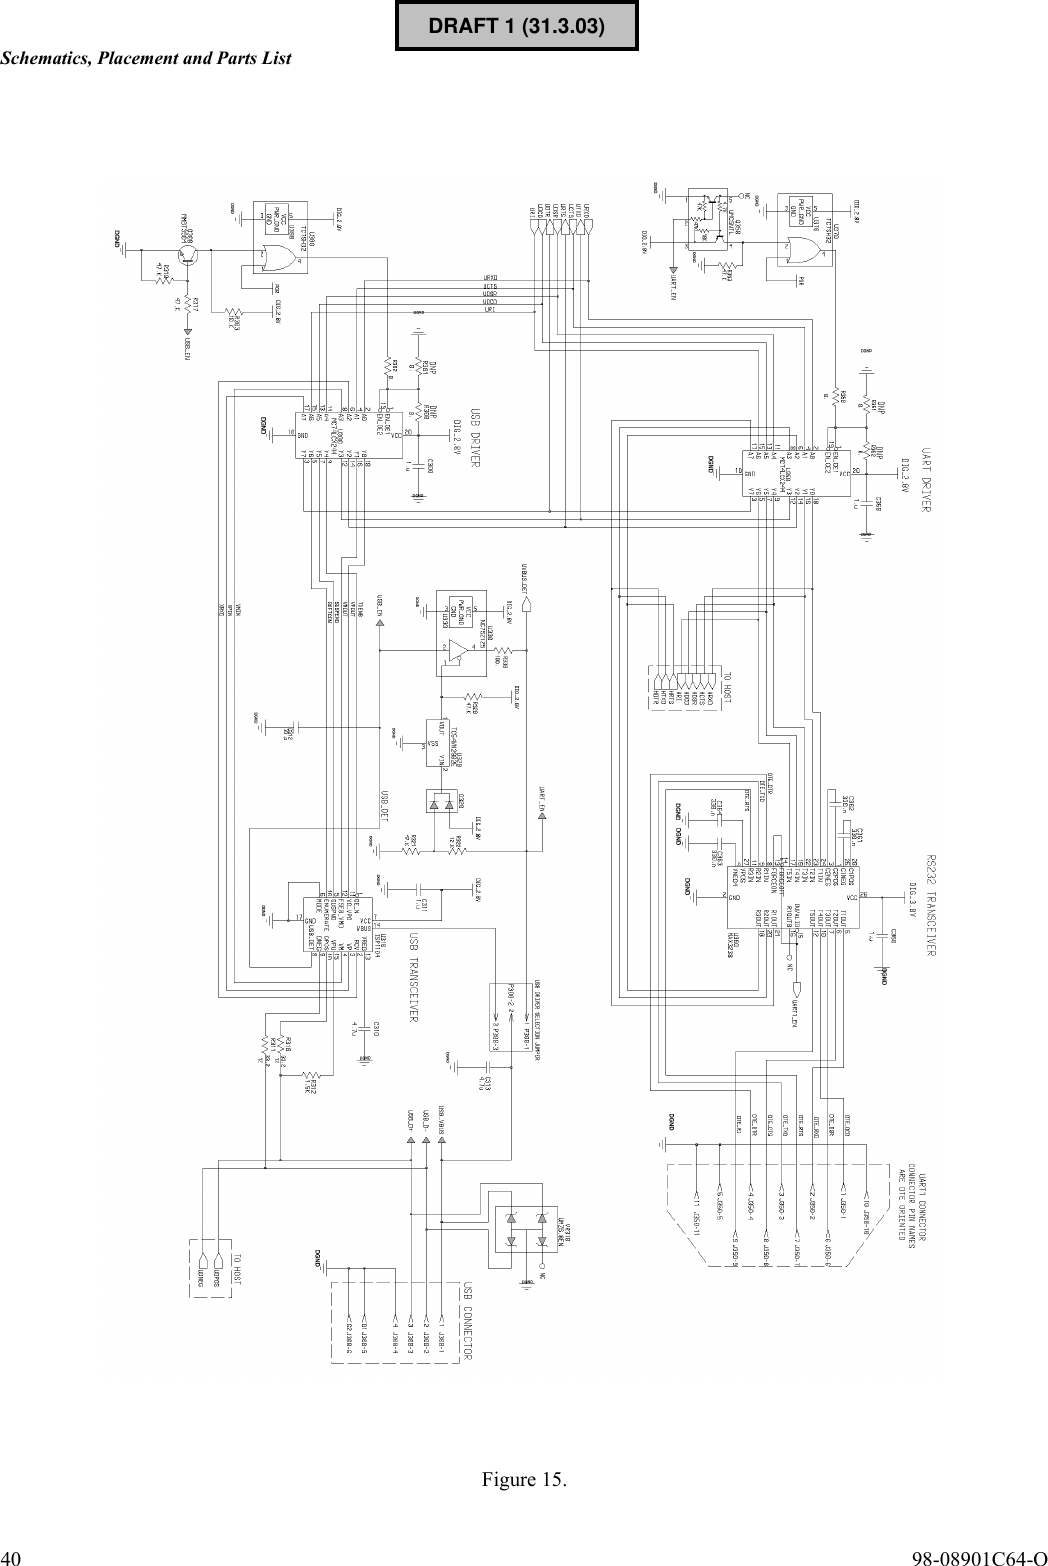 Schematics, Placement and Parts List40  98-08901C64-OFigure 15.DRAFT 1 (31.3.03)